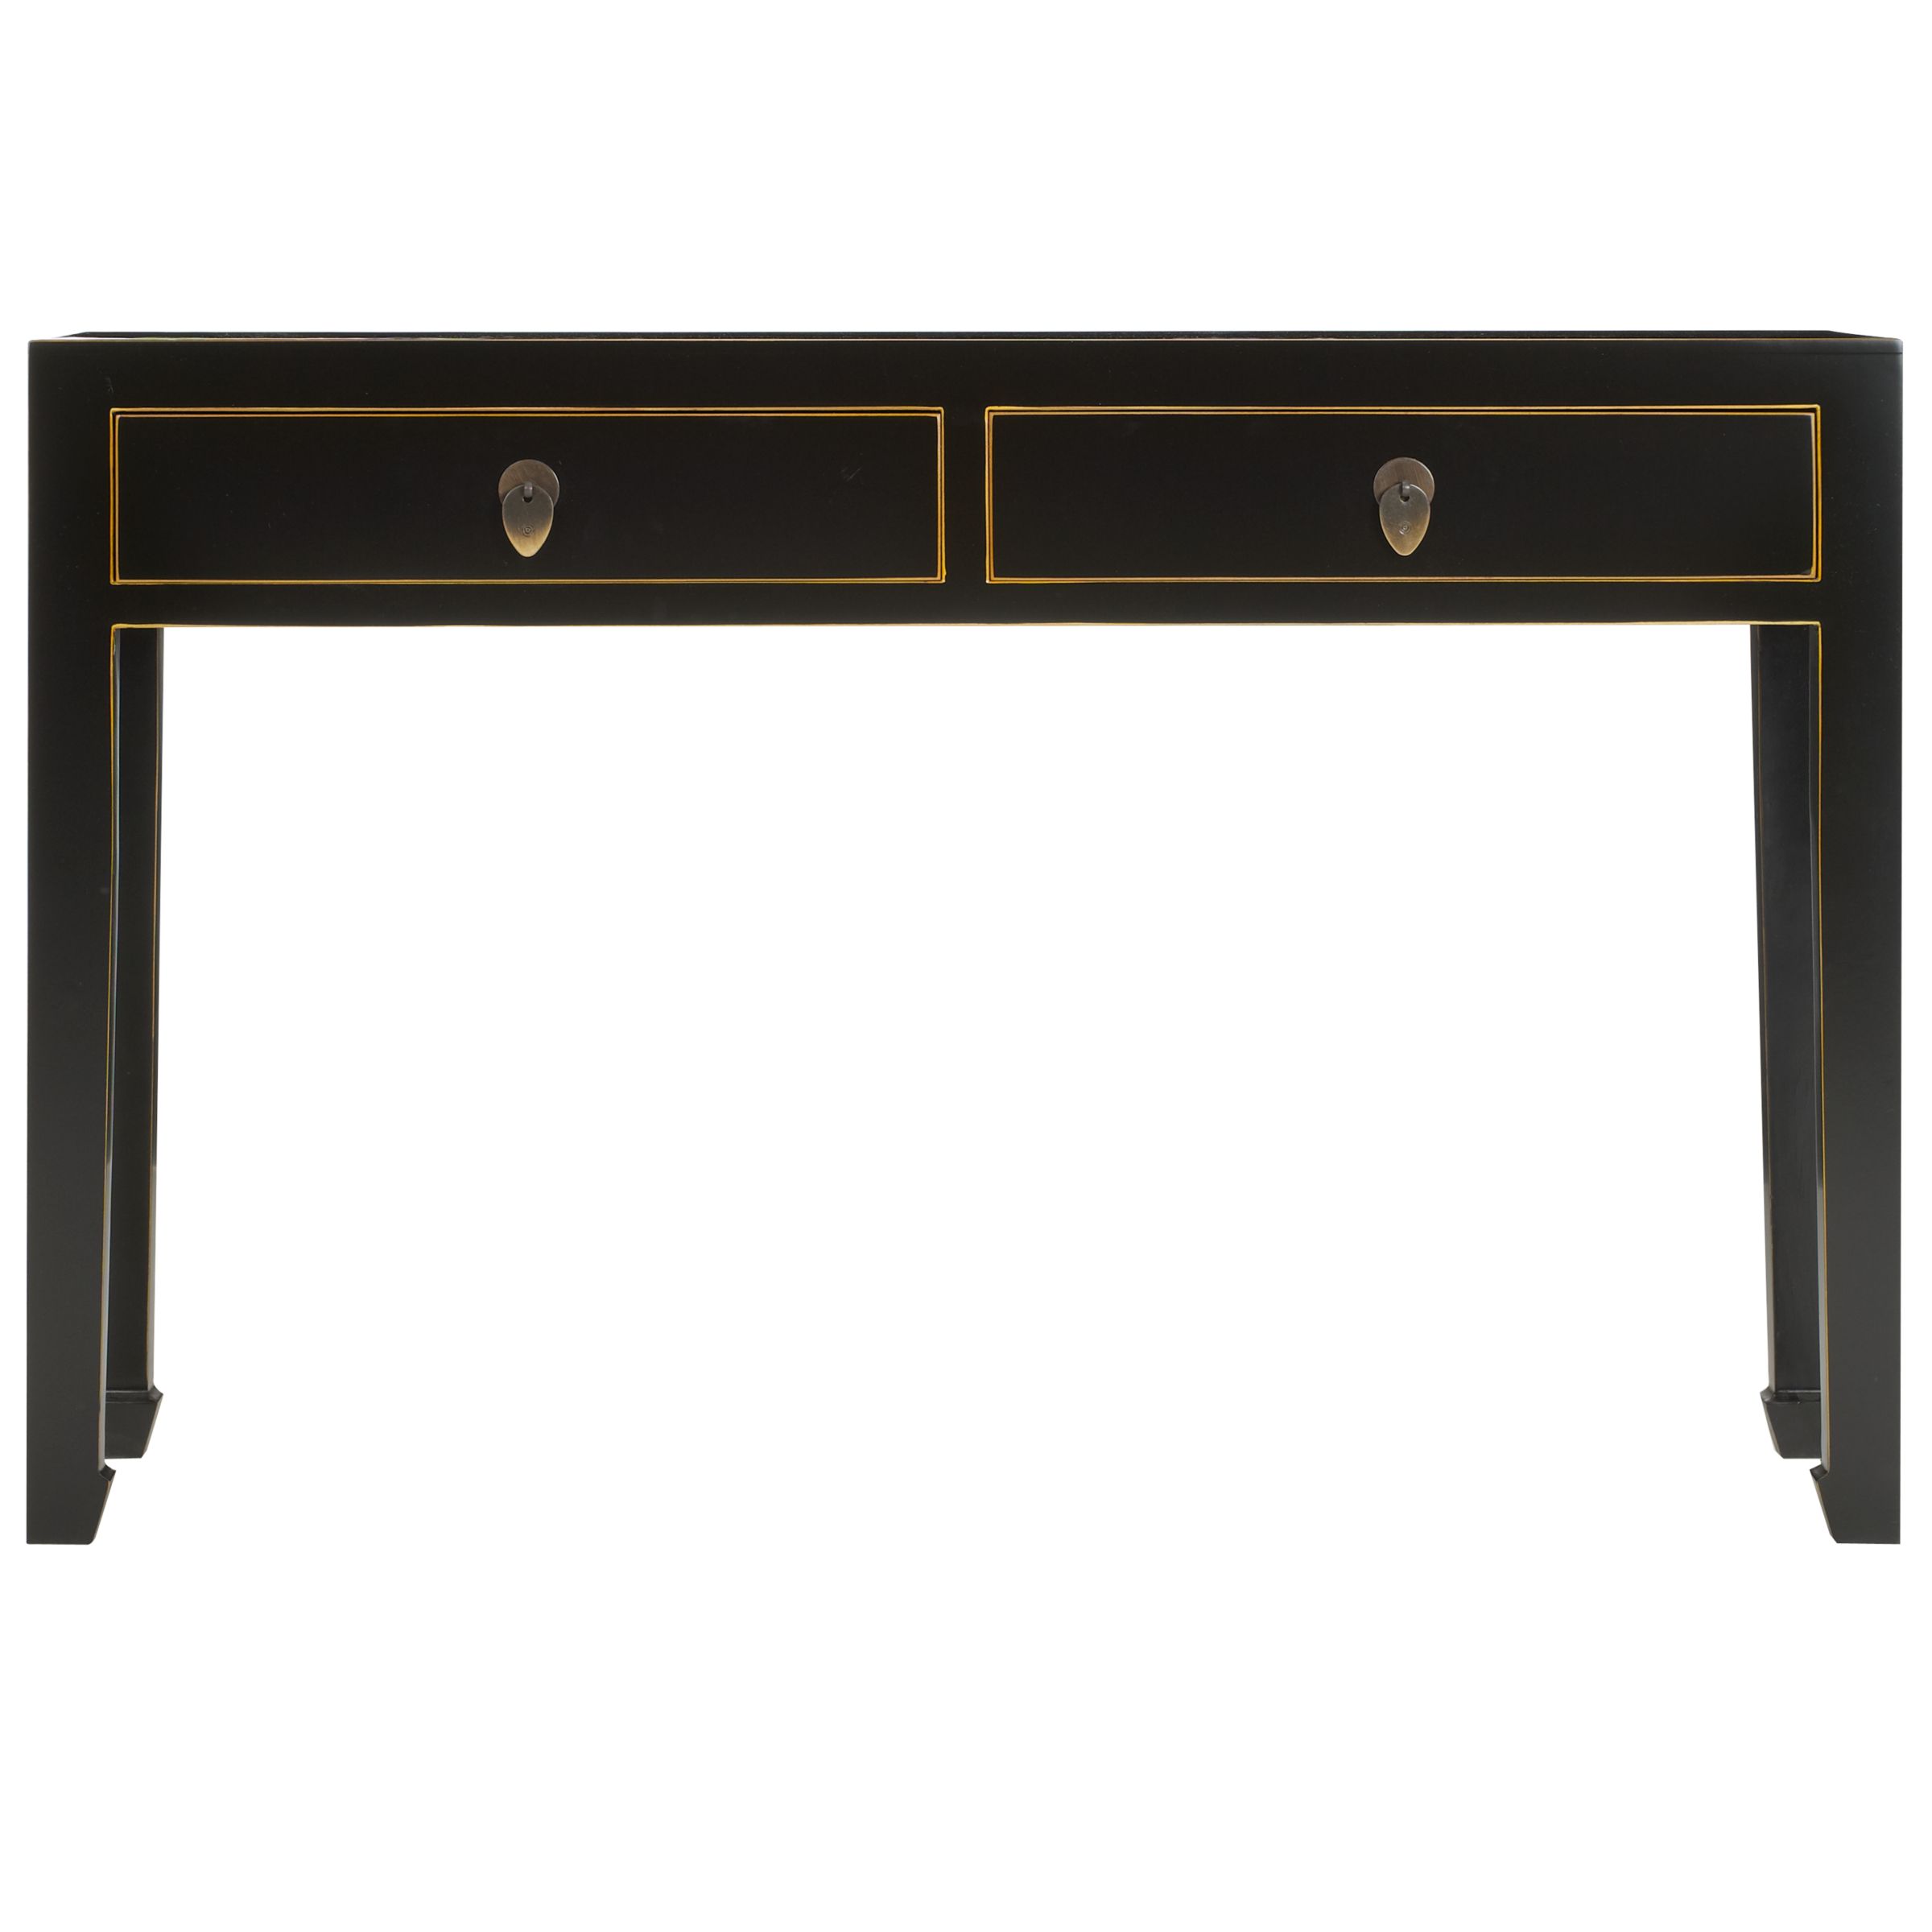 John Lewis Chinese Collection Suri Large Console